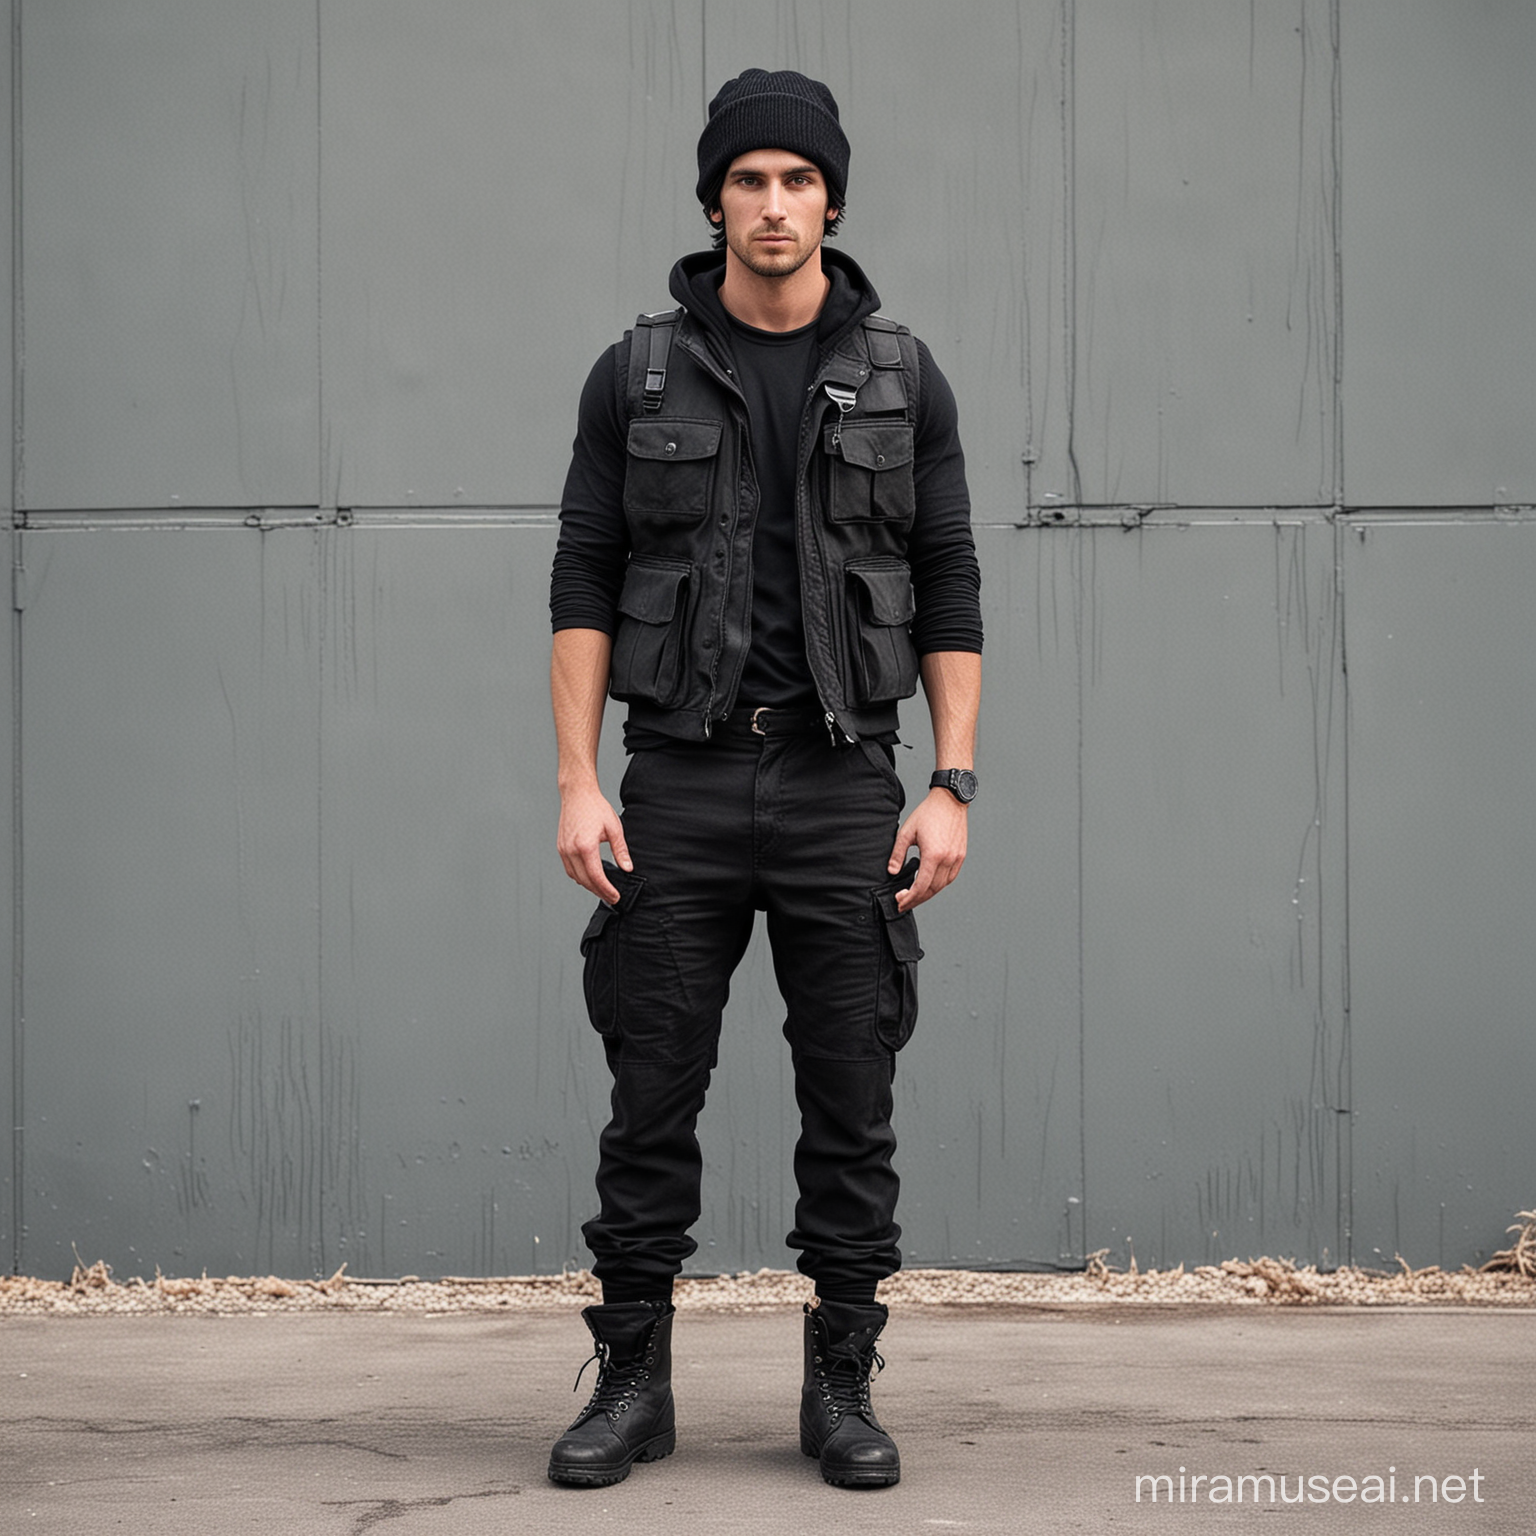 Young Man in PostApocalyptic Attire with Black Bulletproof Vest and Beanie